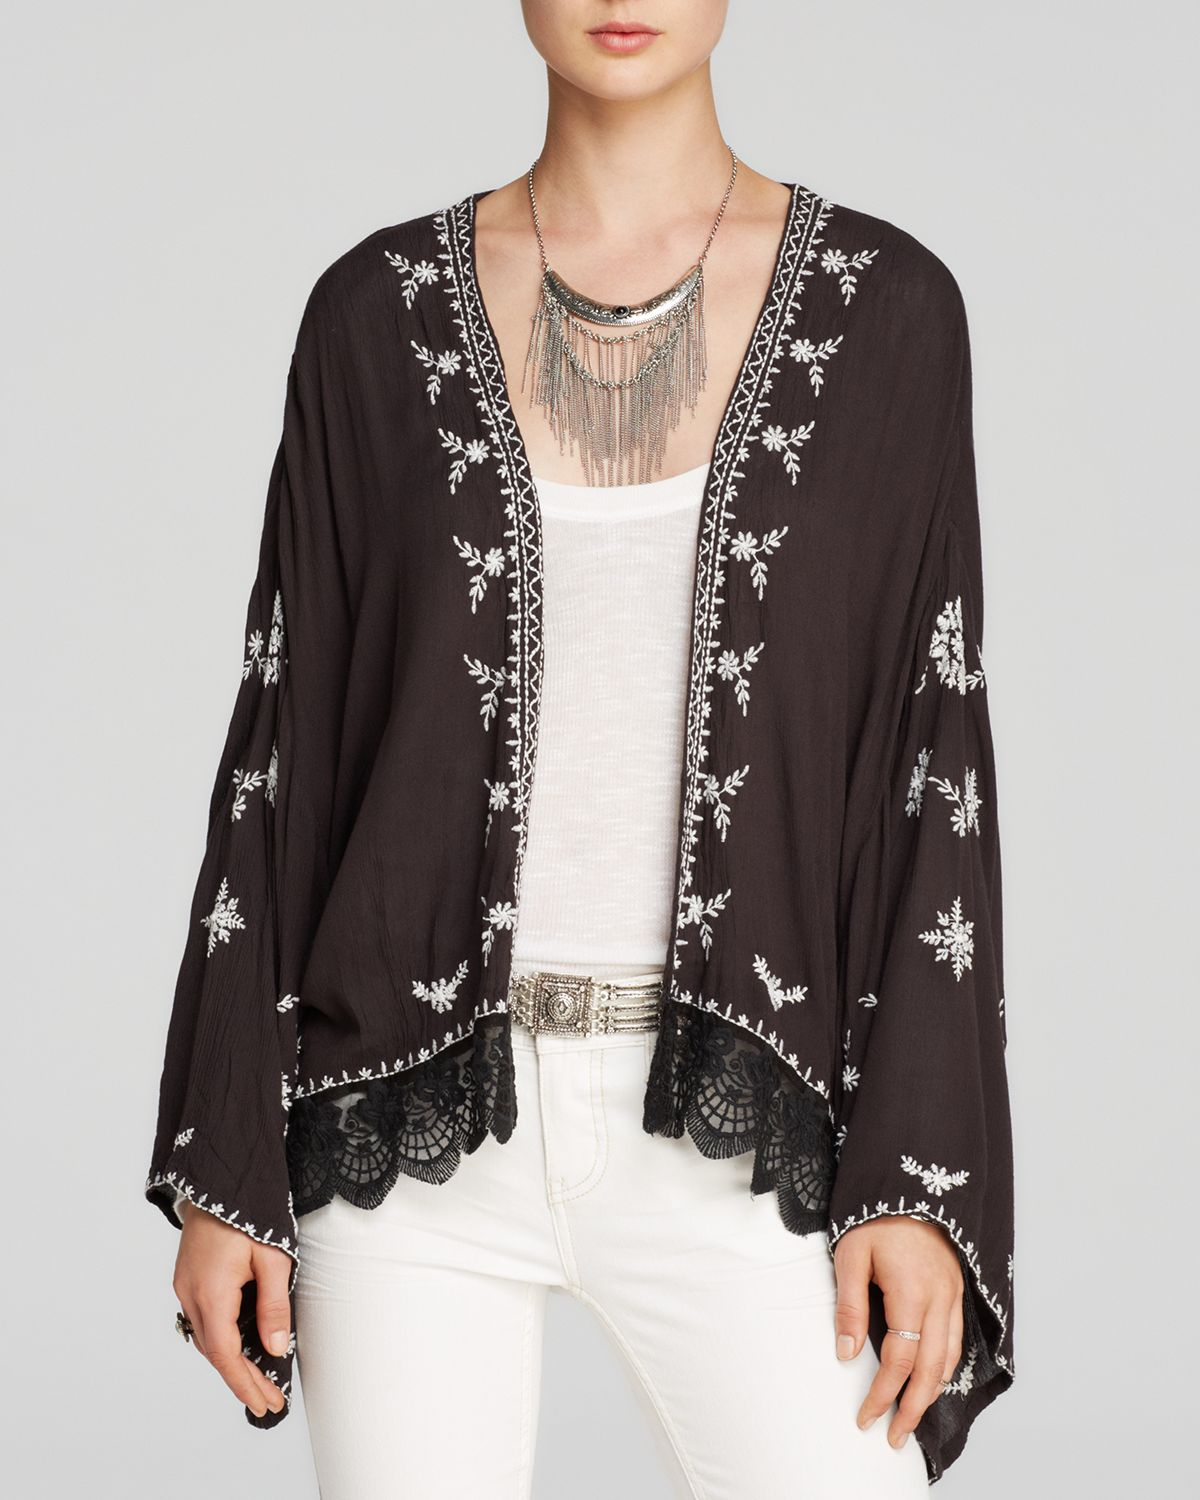 Free People Embroidered Kimono Jacket in Black | Lyst